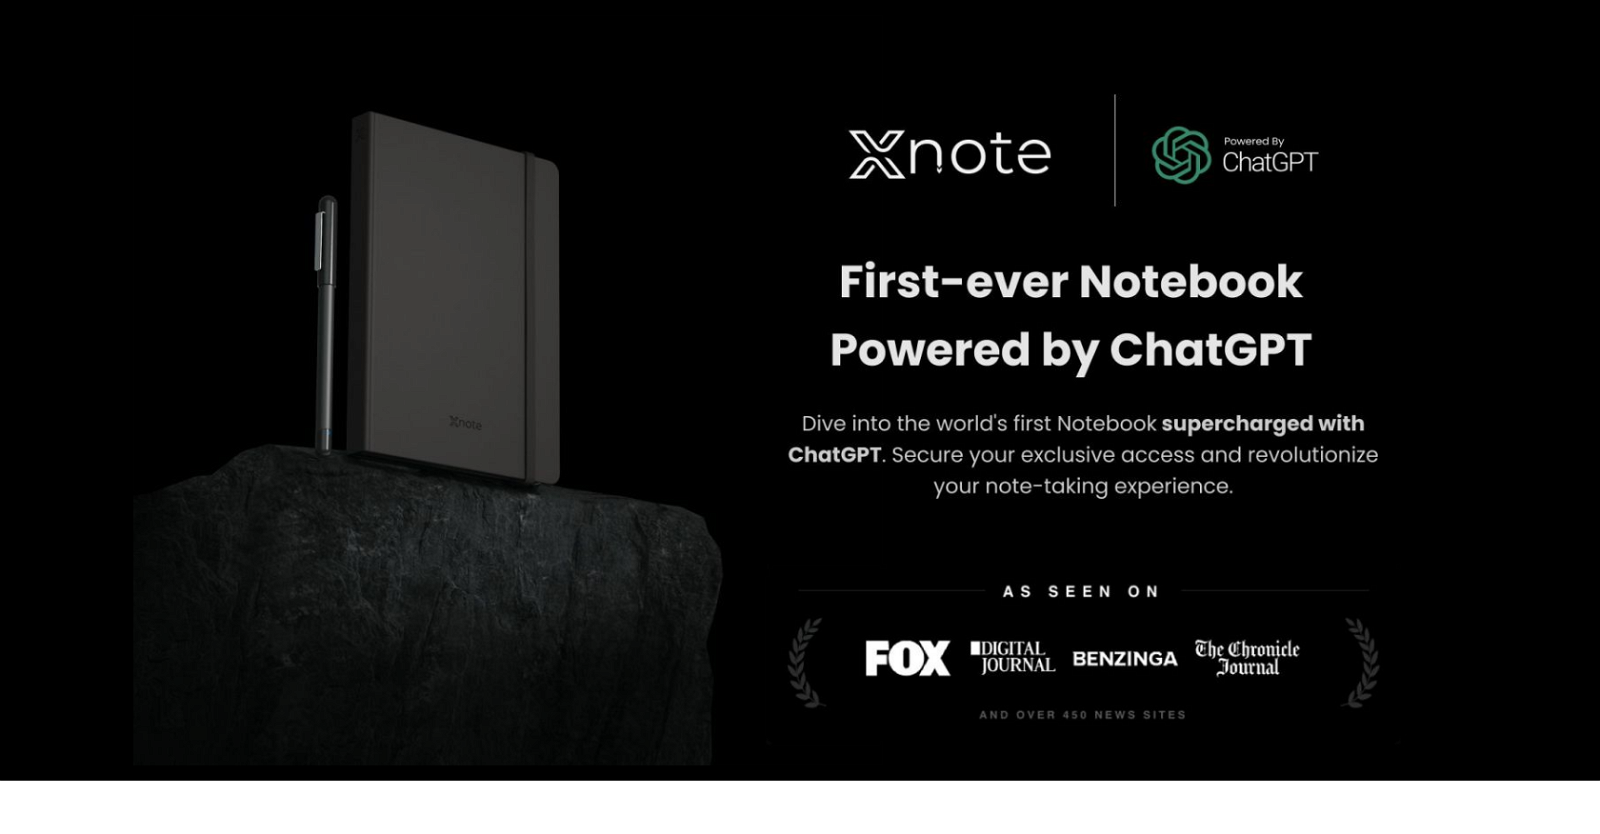 Xnote website